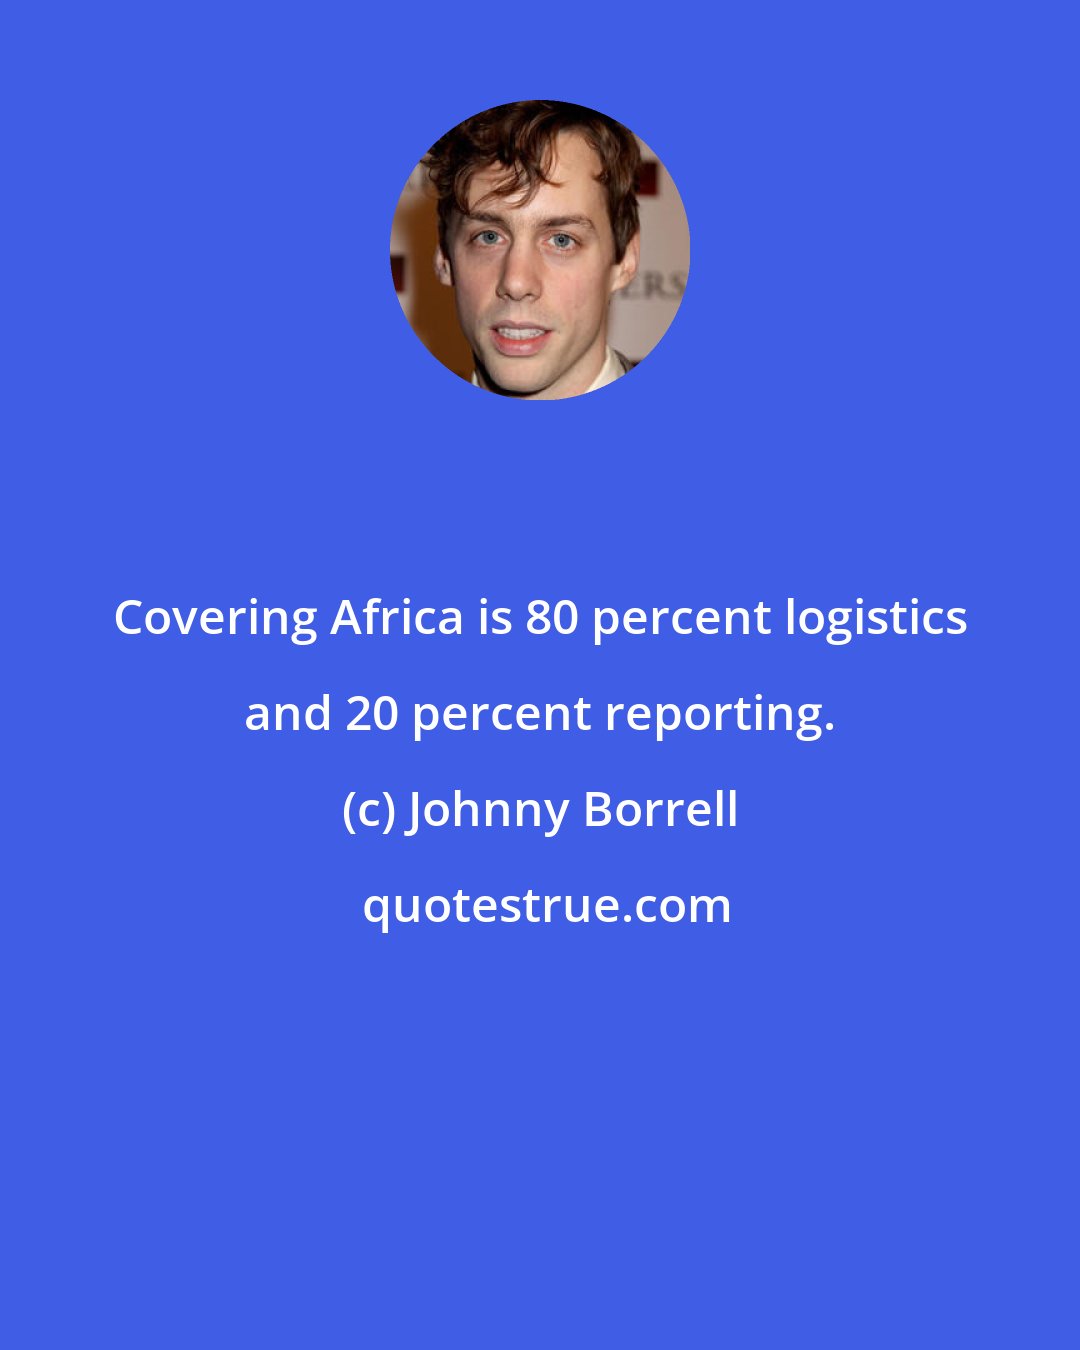 Johnny Borrell: Covering Africa is 80 percent logistics and 20 percent reporting.